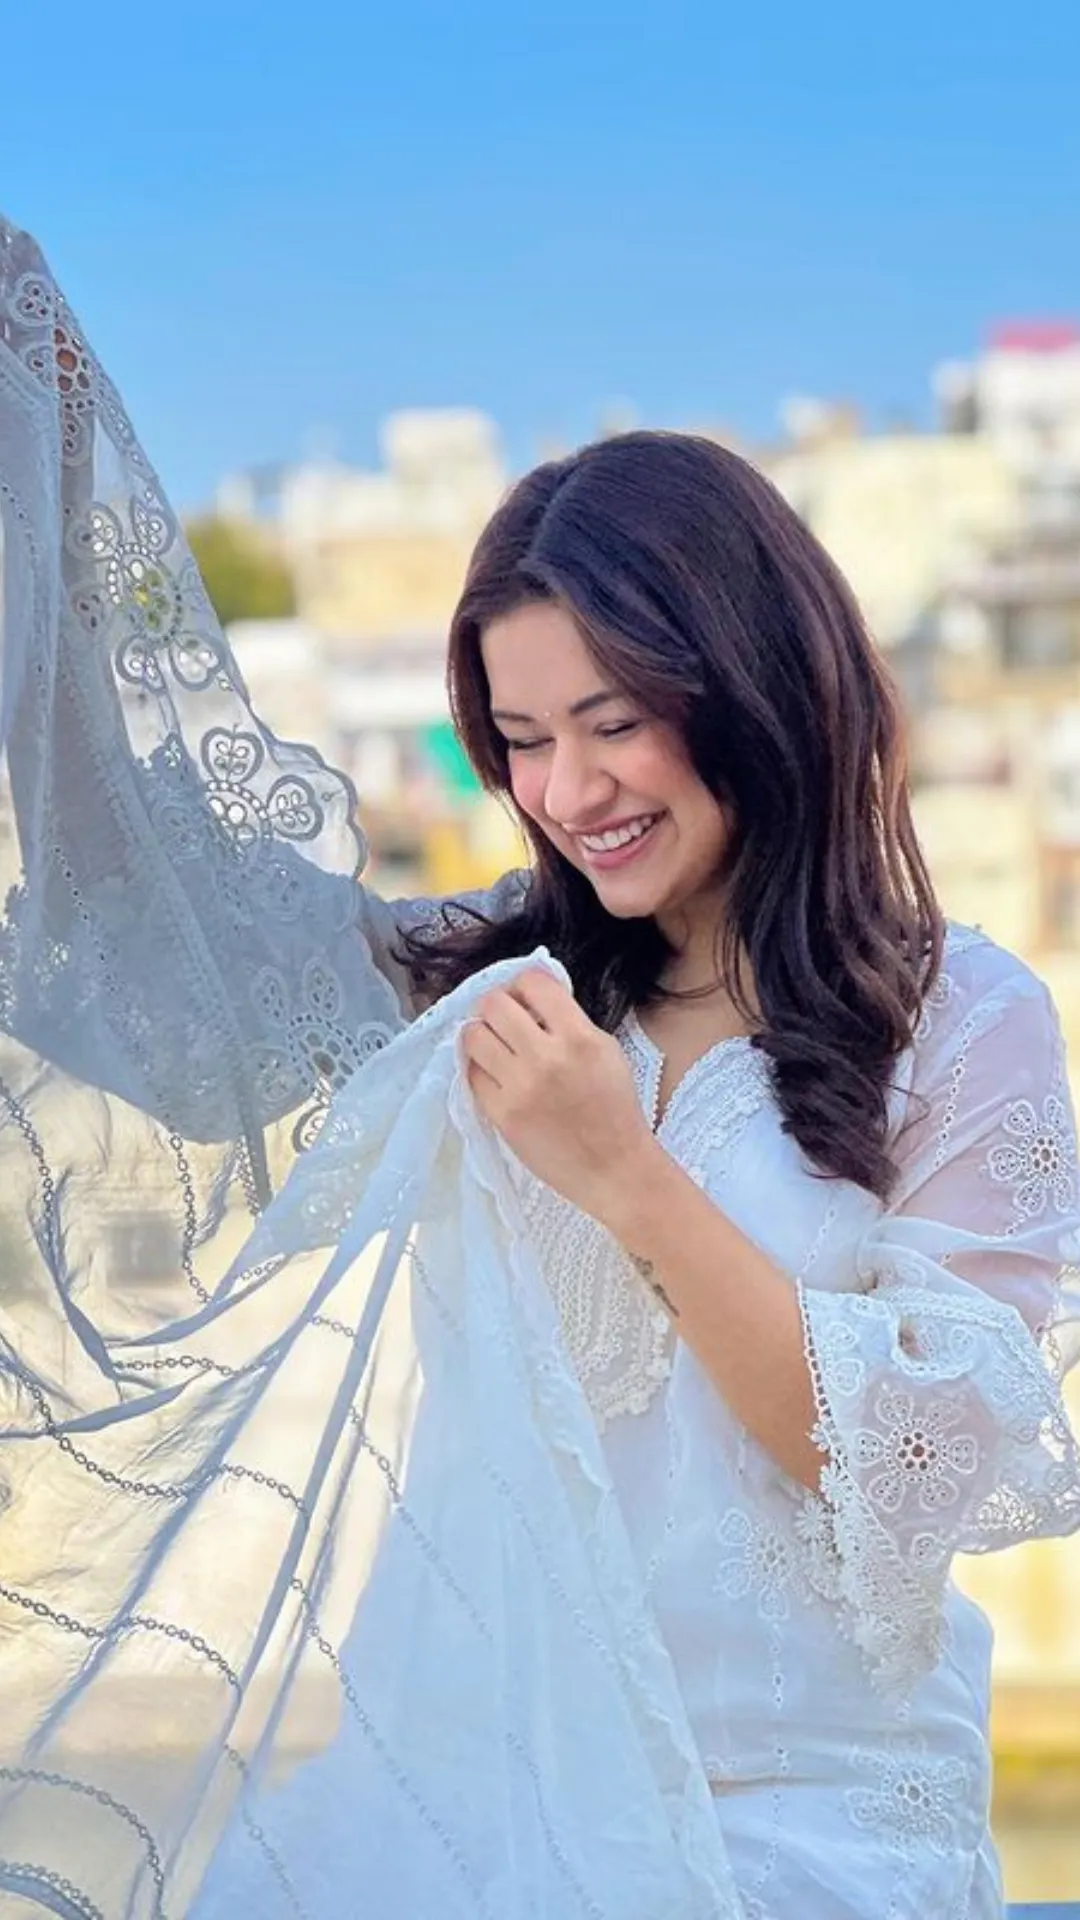 Avneet Kaur Charms With Her Dreamy Look in a White gown, poses at Piazza  Navona in Roma - BridalTweet Wedding Forum & Vendor Directory